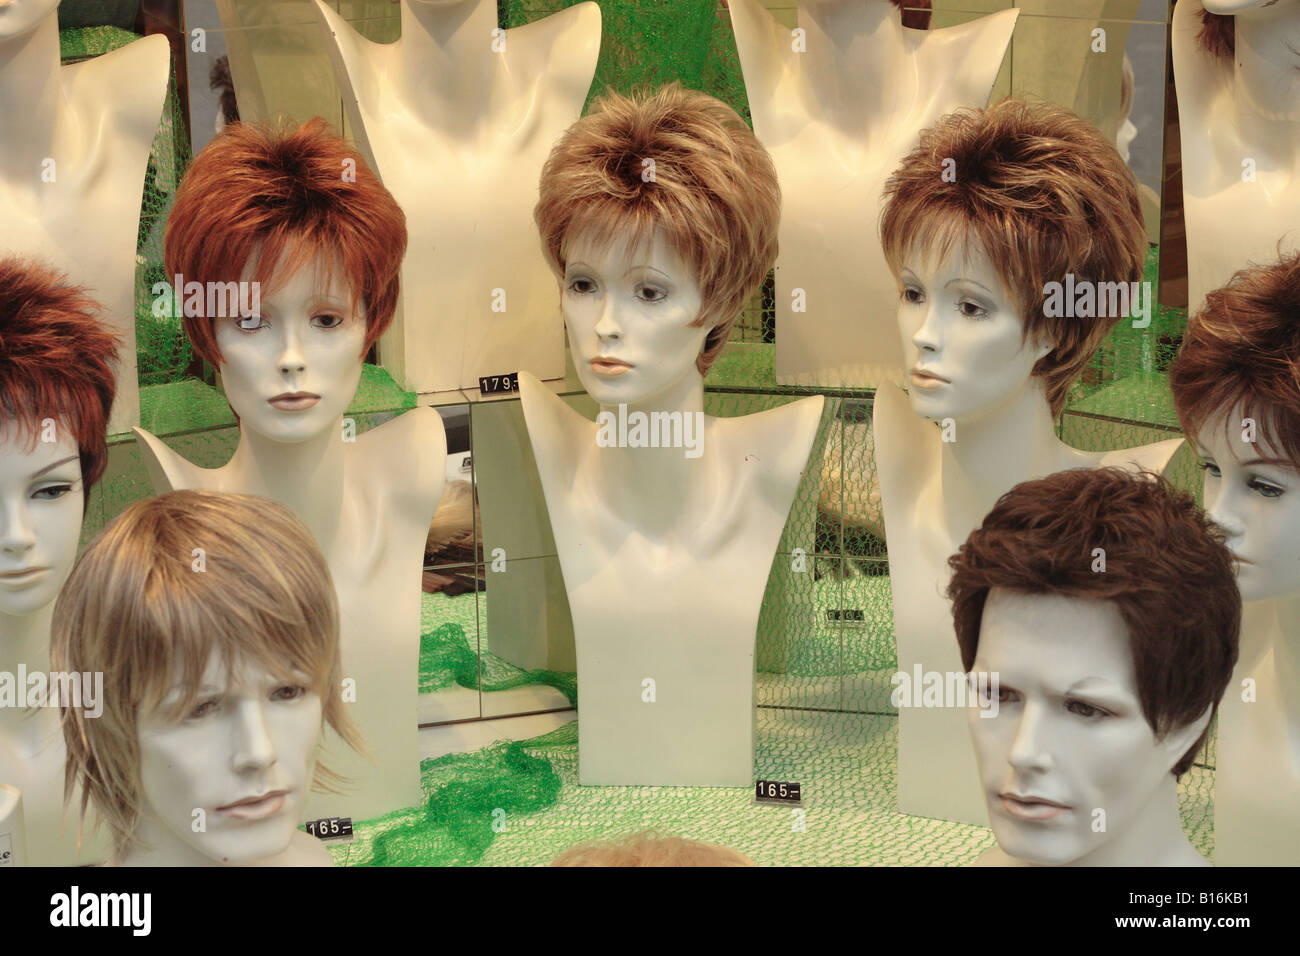 Wig shop window display hair pieces for women and men Stock Photo - Alamy